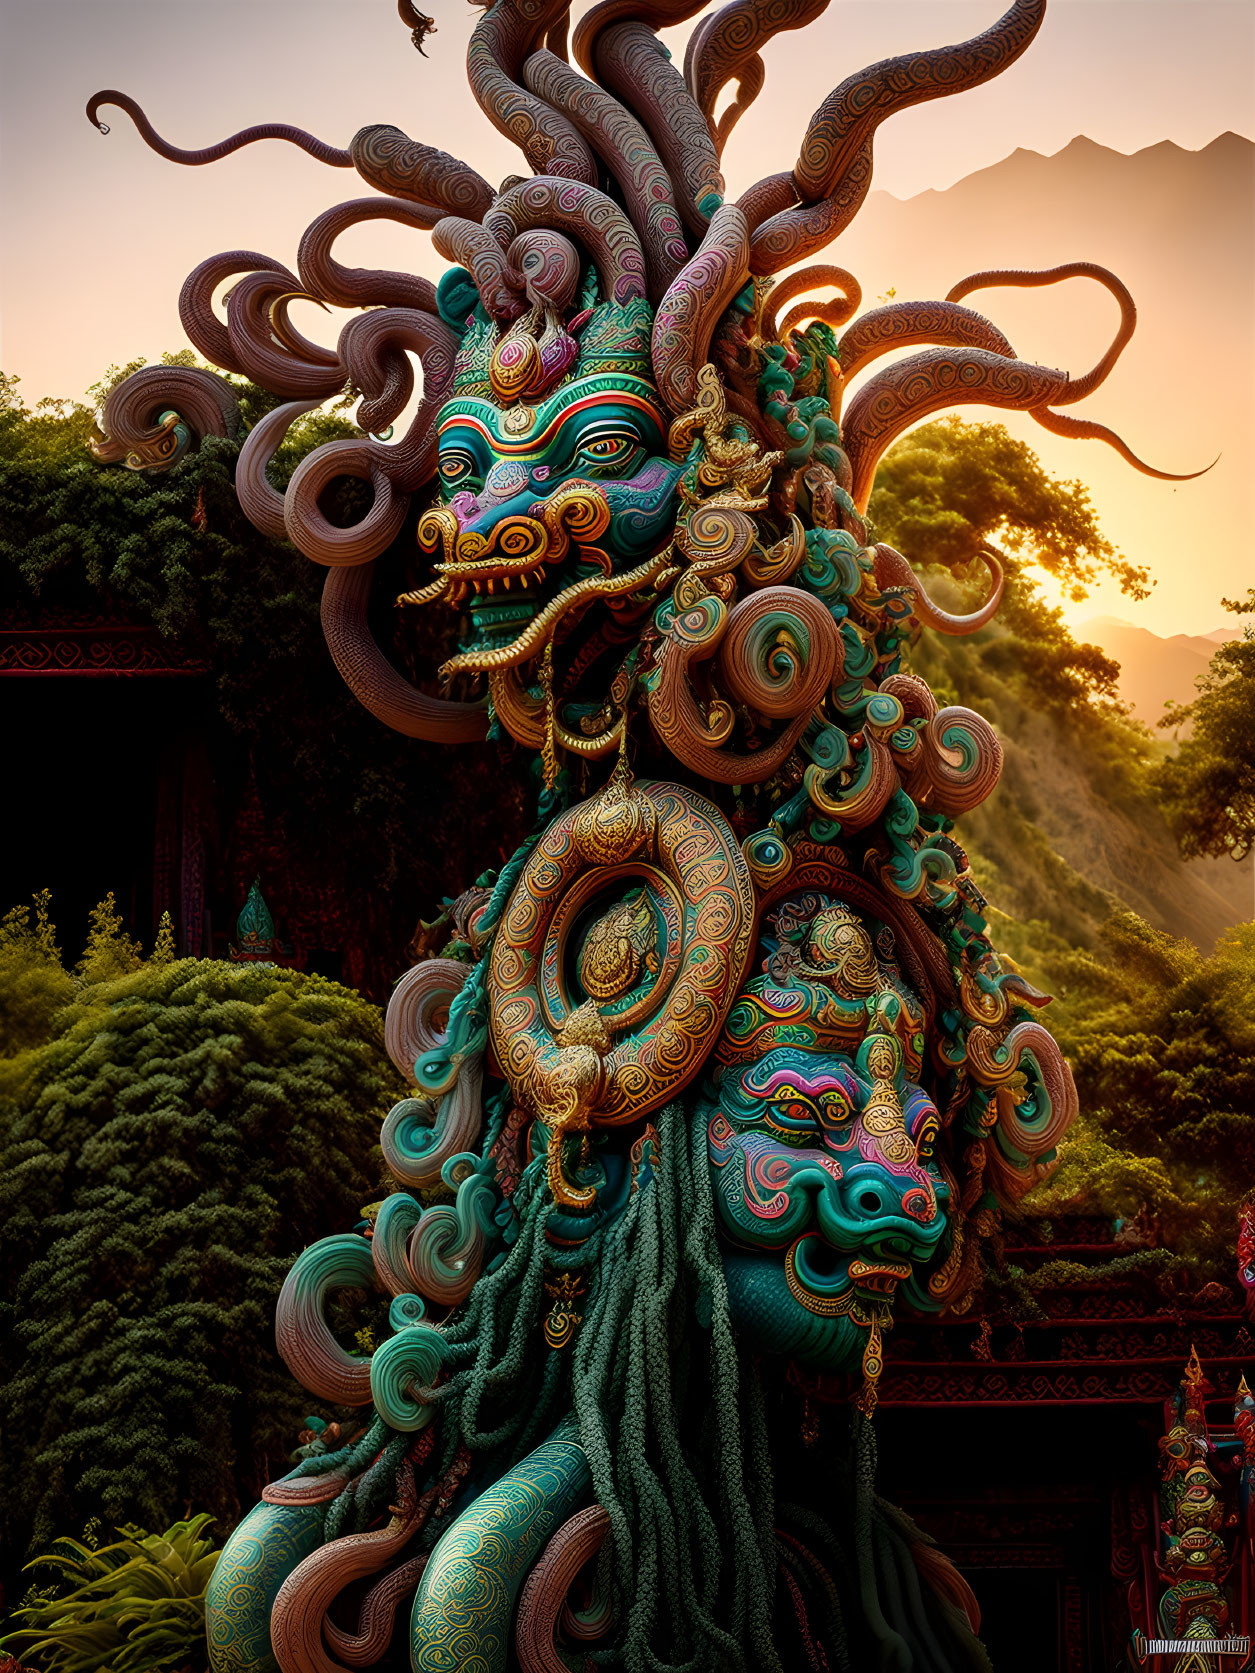 Colorful Serpentine Statue Against Sunset Mountains and Temple